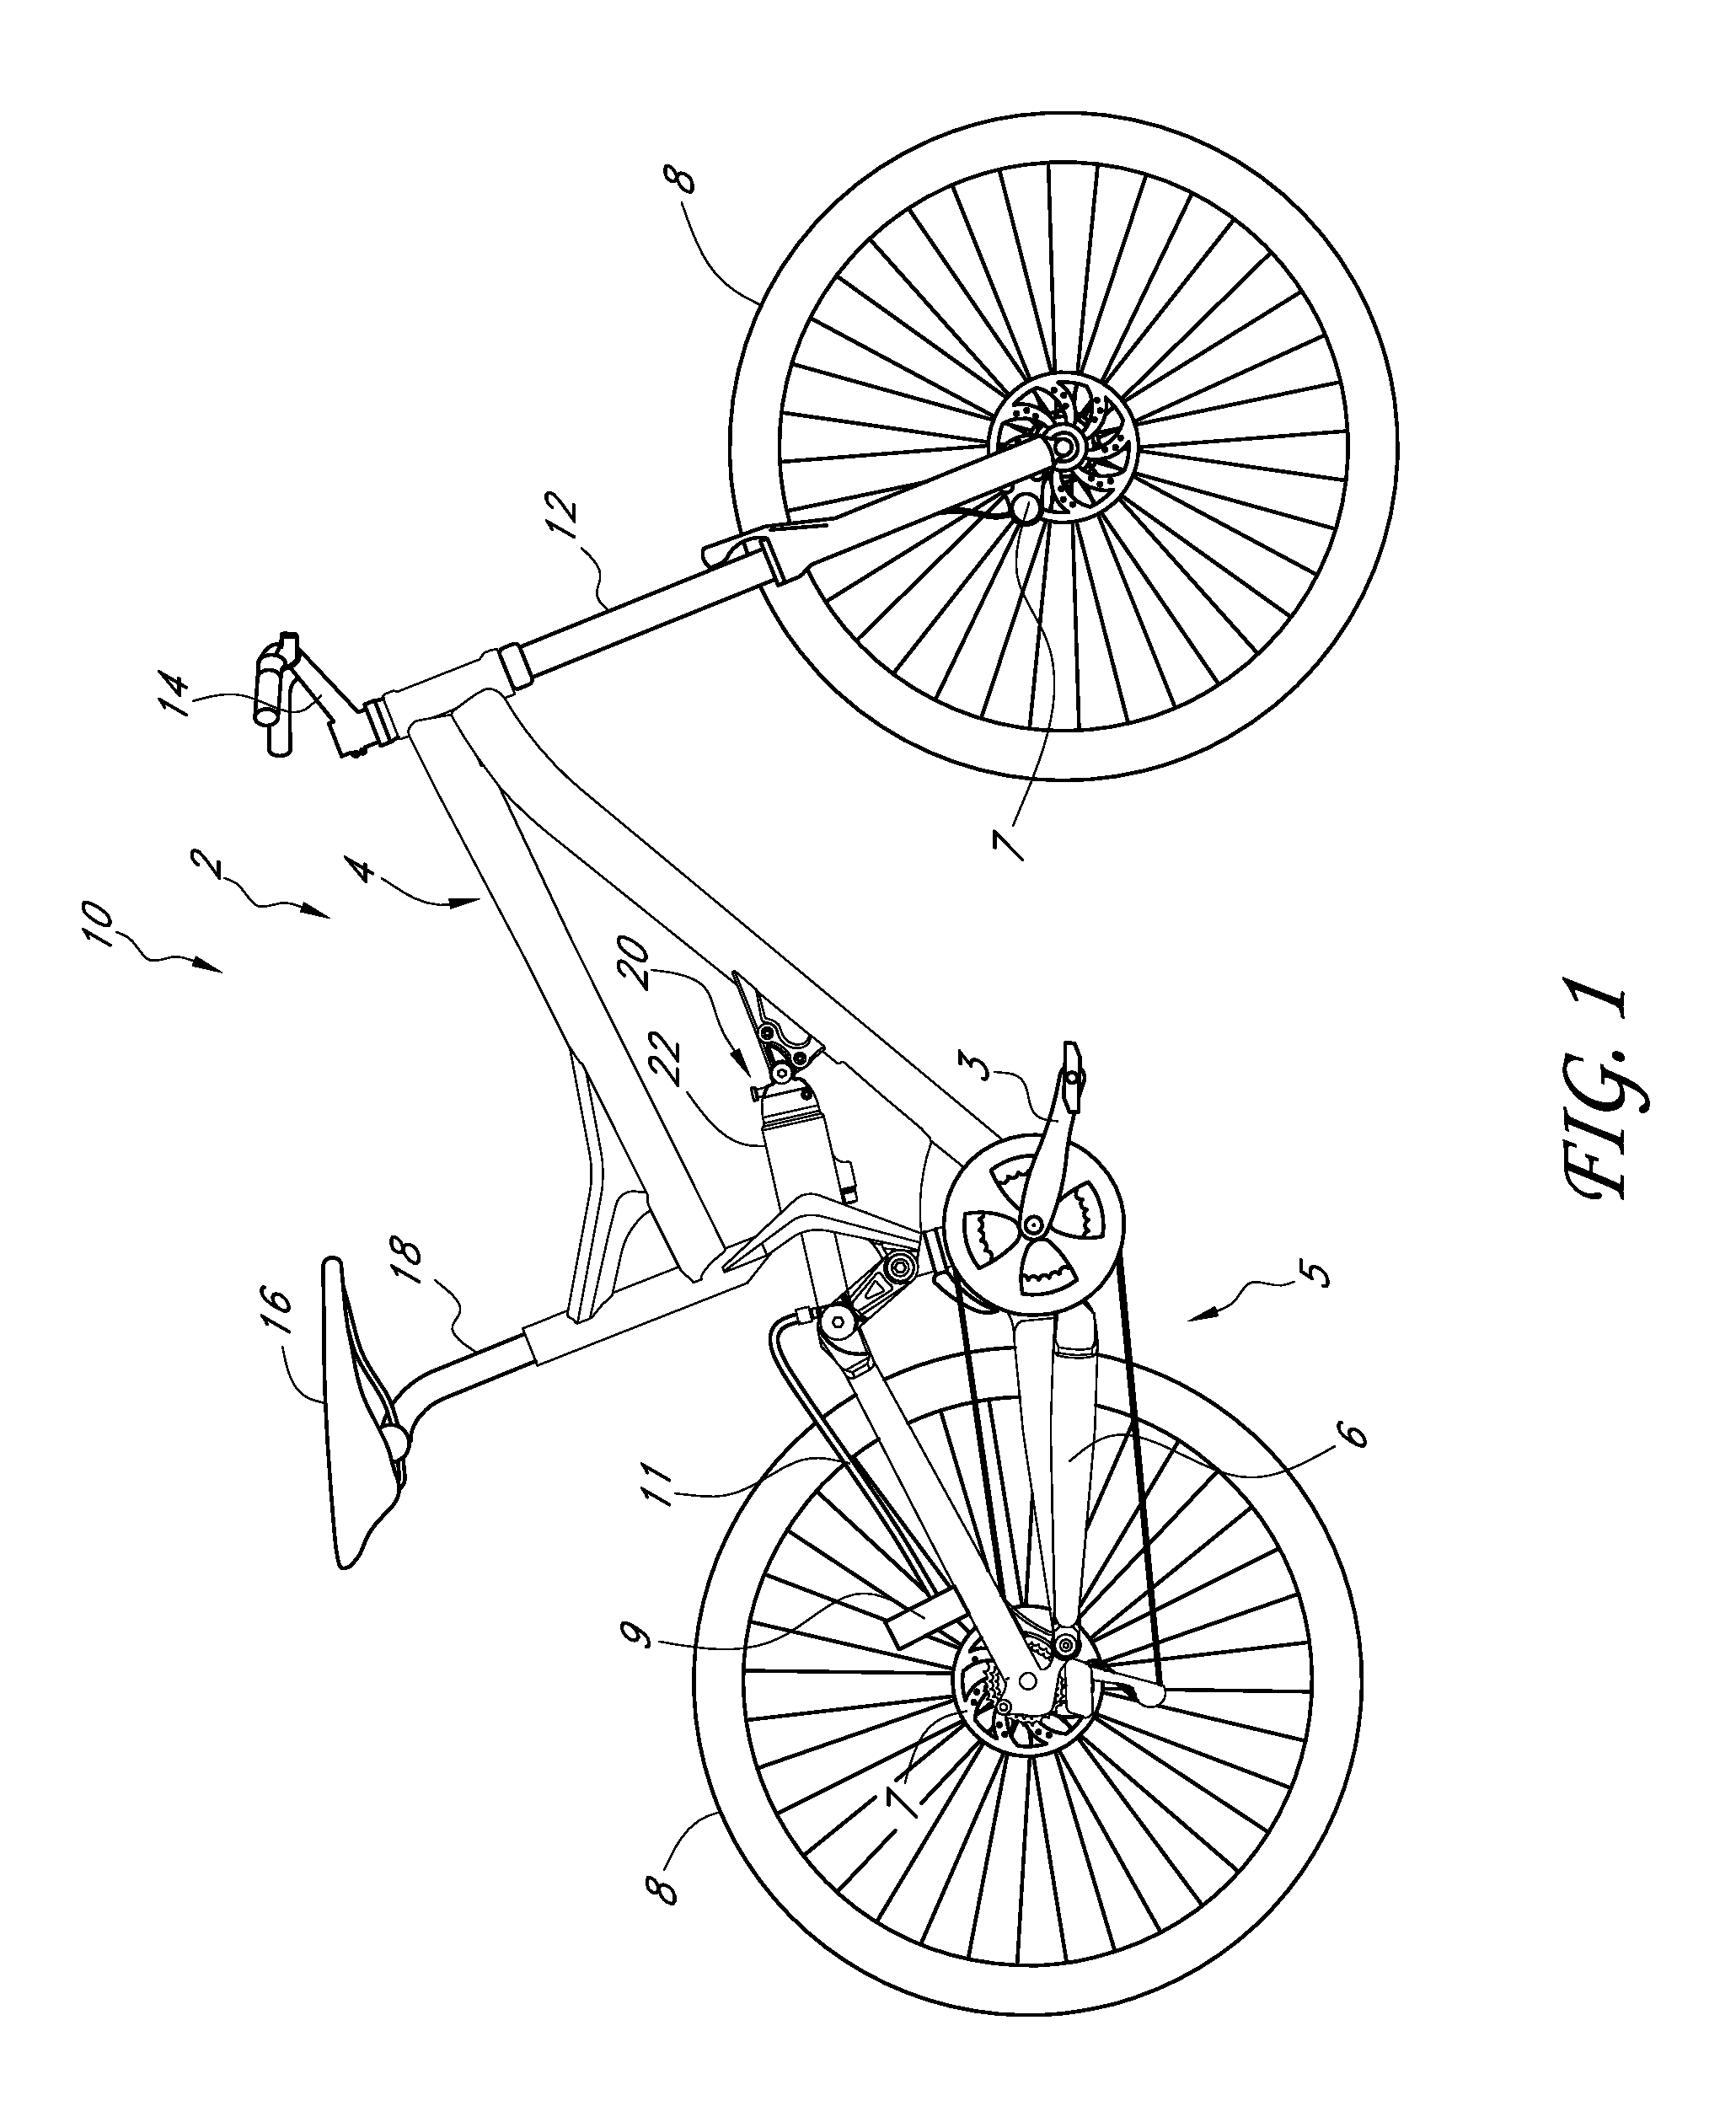 Bicycle with suspension